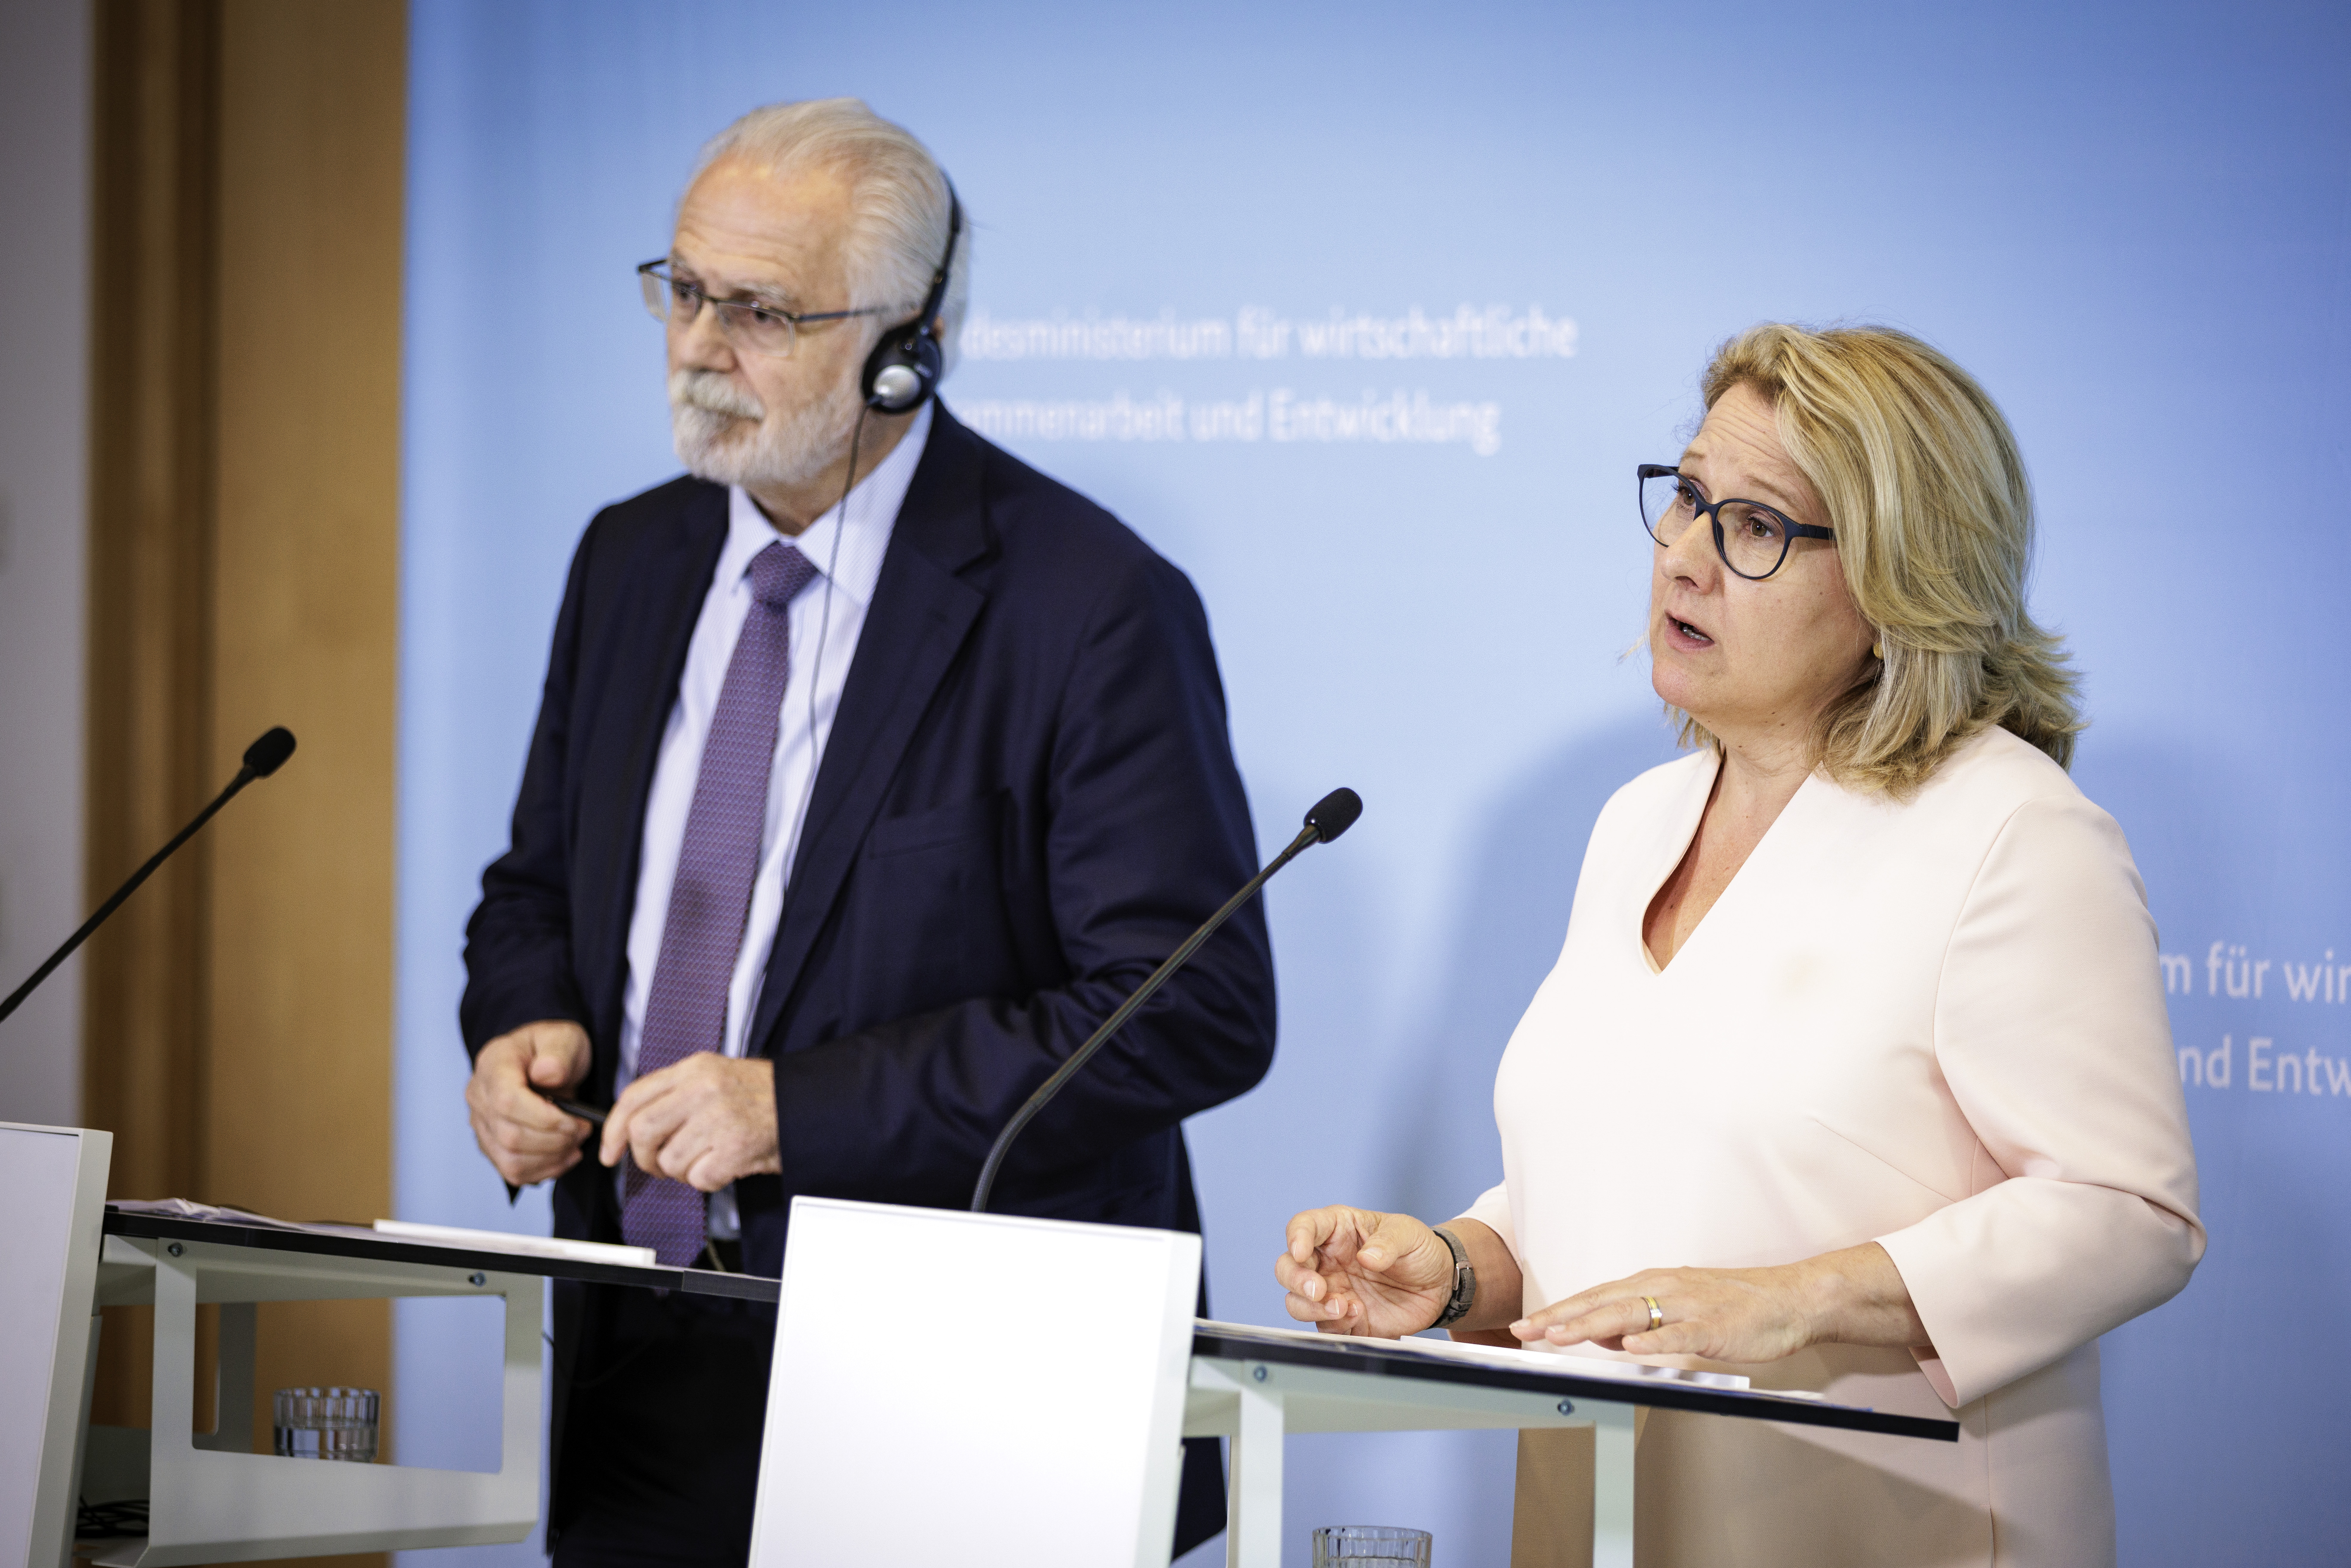 Development Minister Svenja Schulze and Roberto Jaguaribe, Brazilian ambassador and spokesperson for the Latin American countries in Berlin, at the presentation of the new BMZ strategy for cooperation with the countries in Latin America and the Caribbean